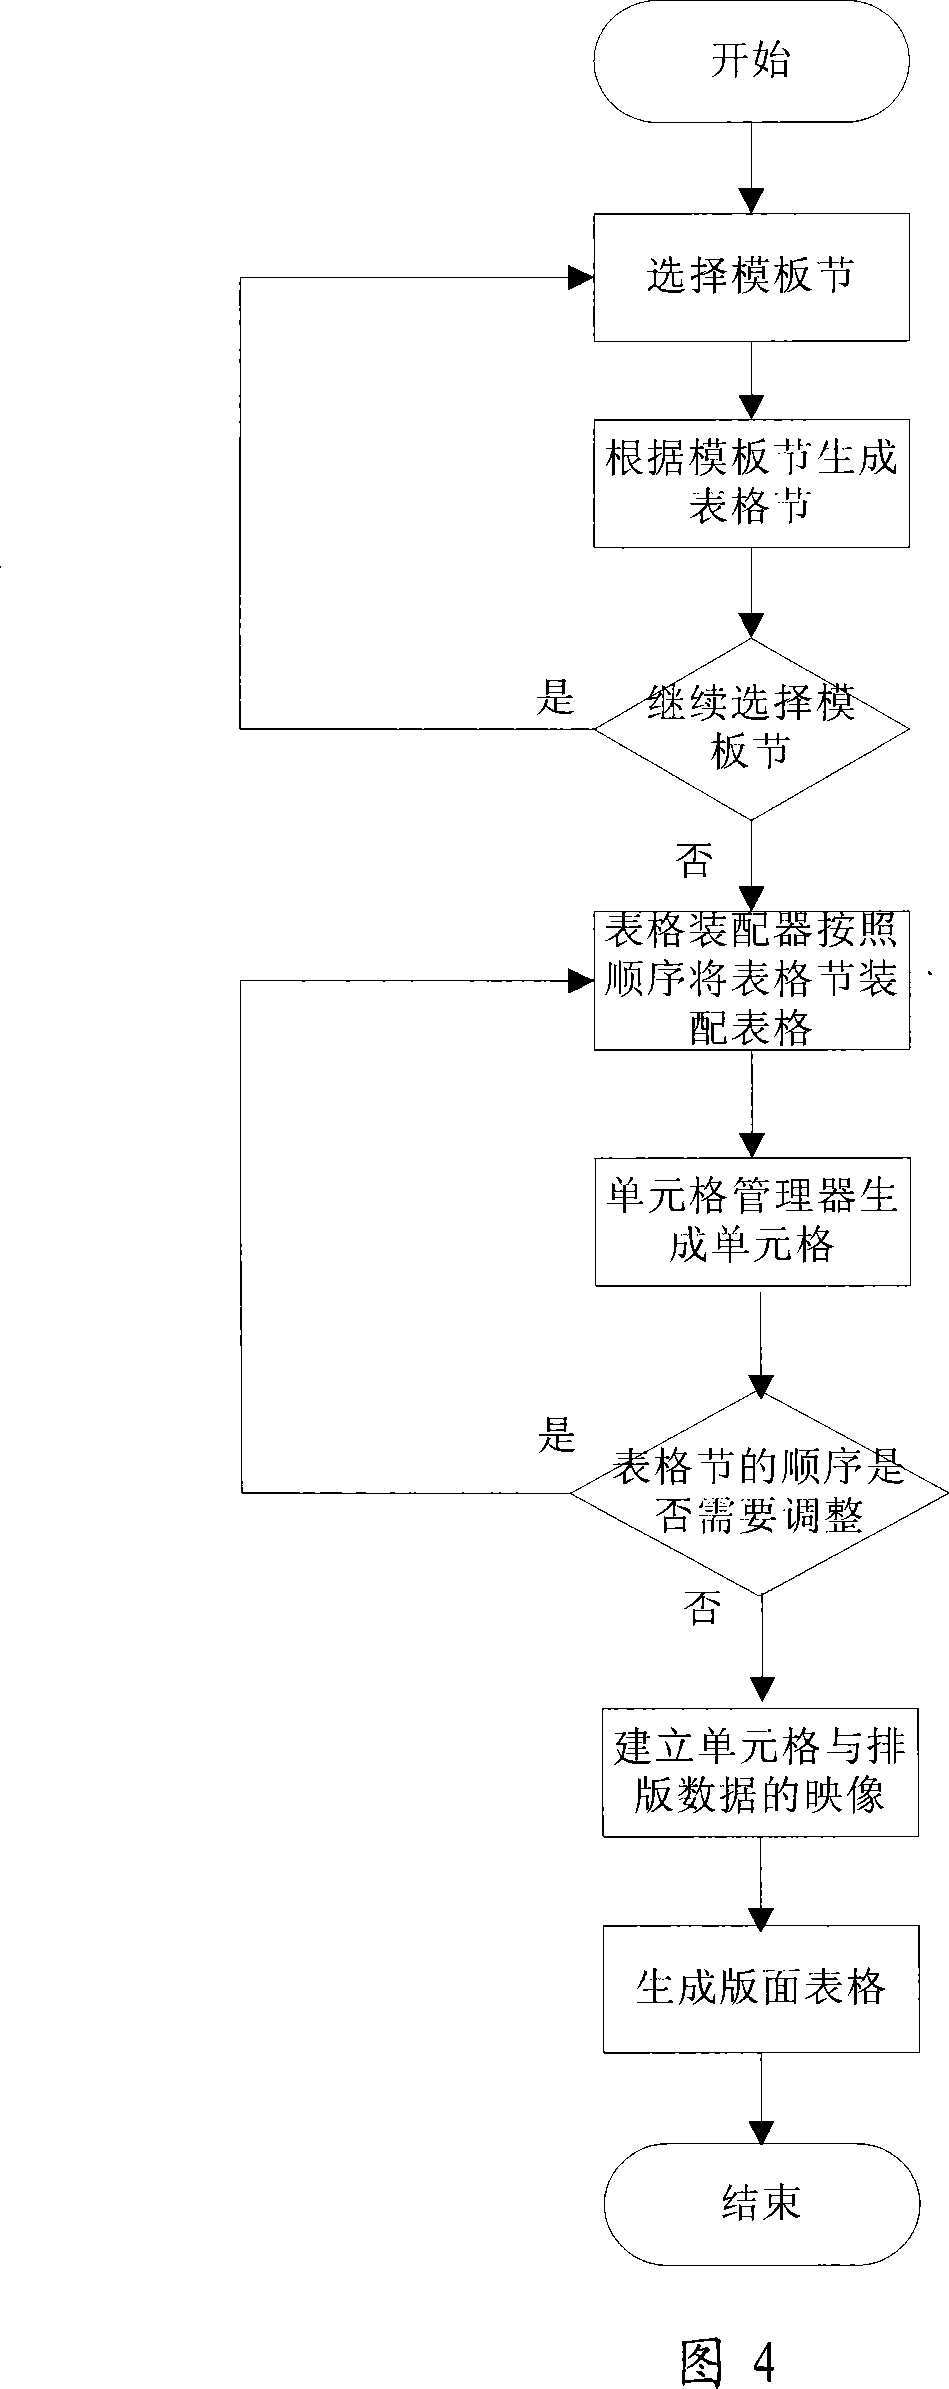 Form quick-speed generation system and method based on moulding plate node